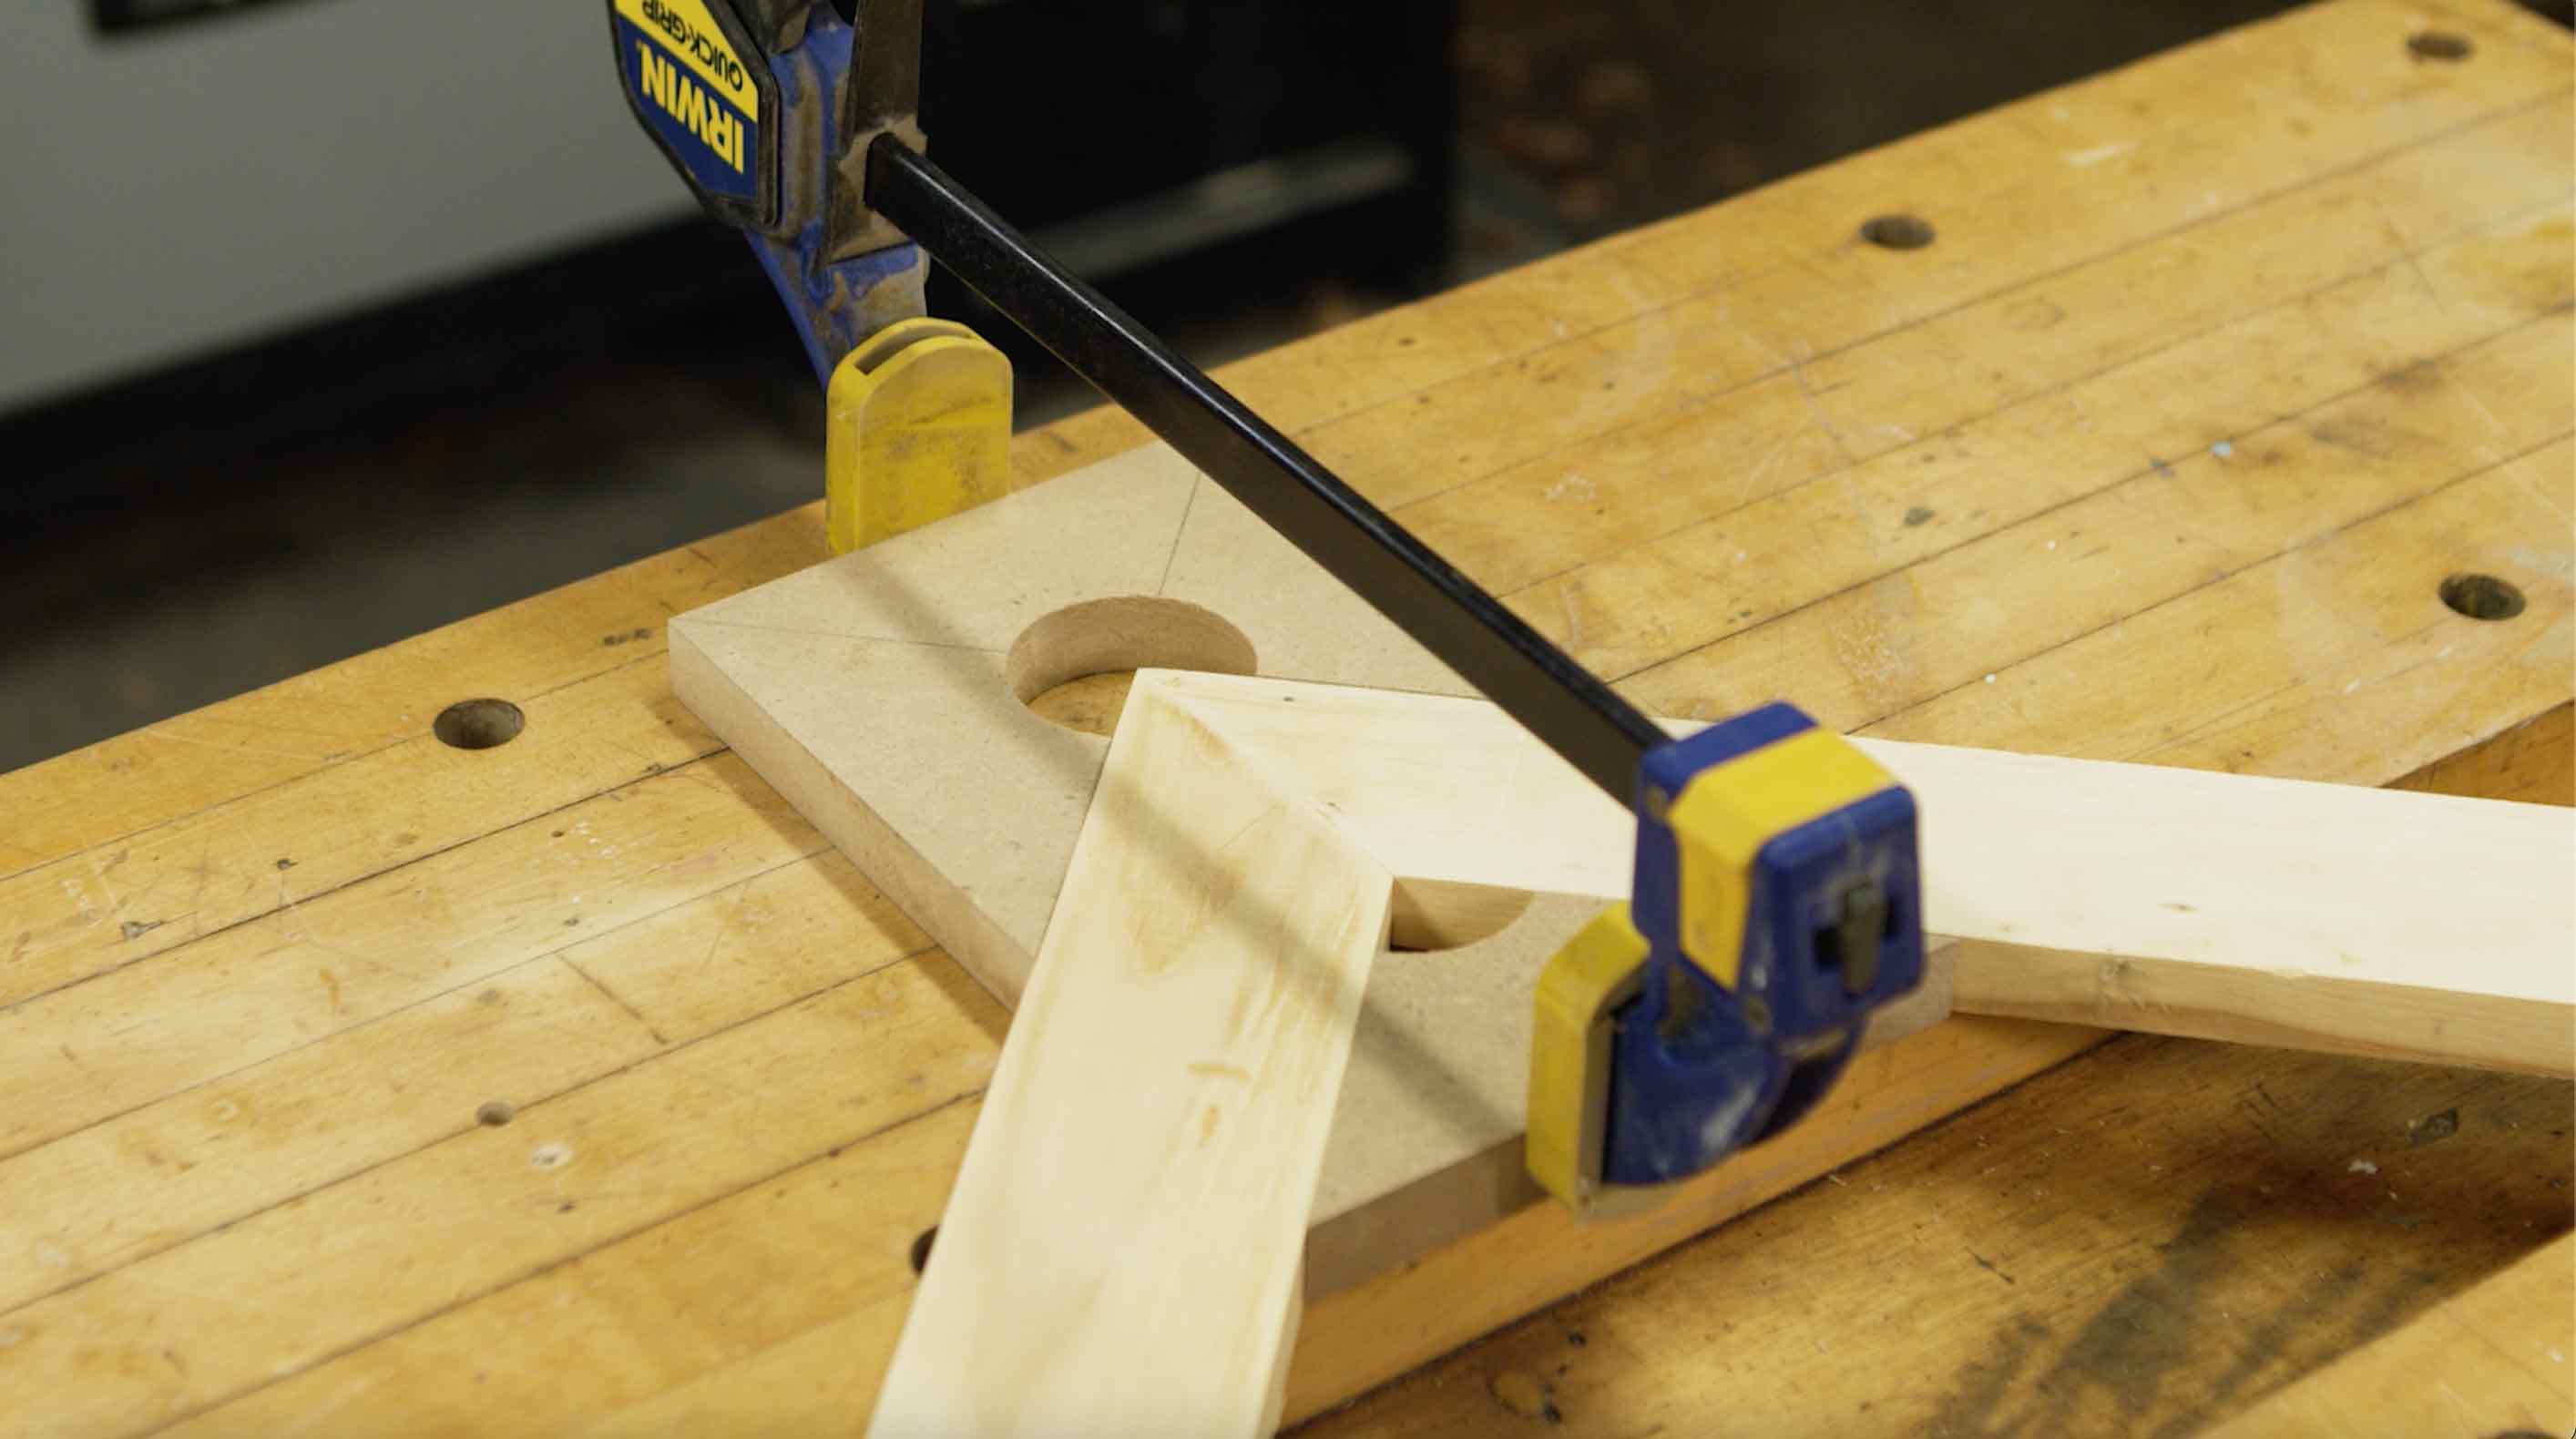 Clamp jig holding mitered corners together